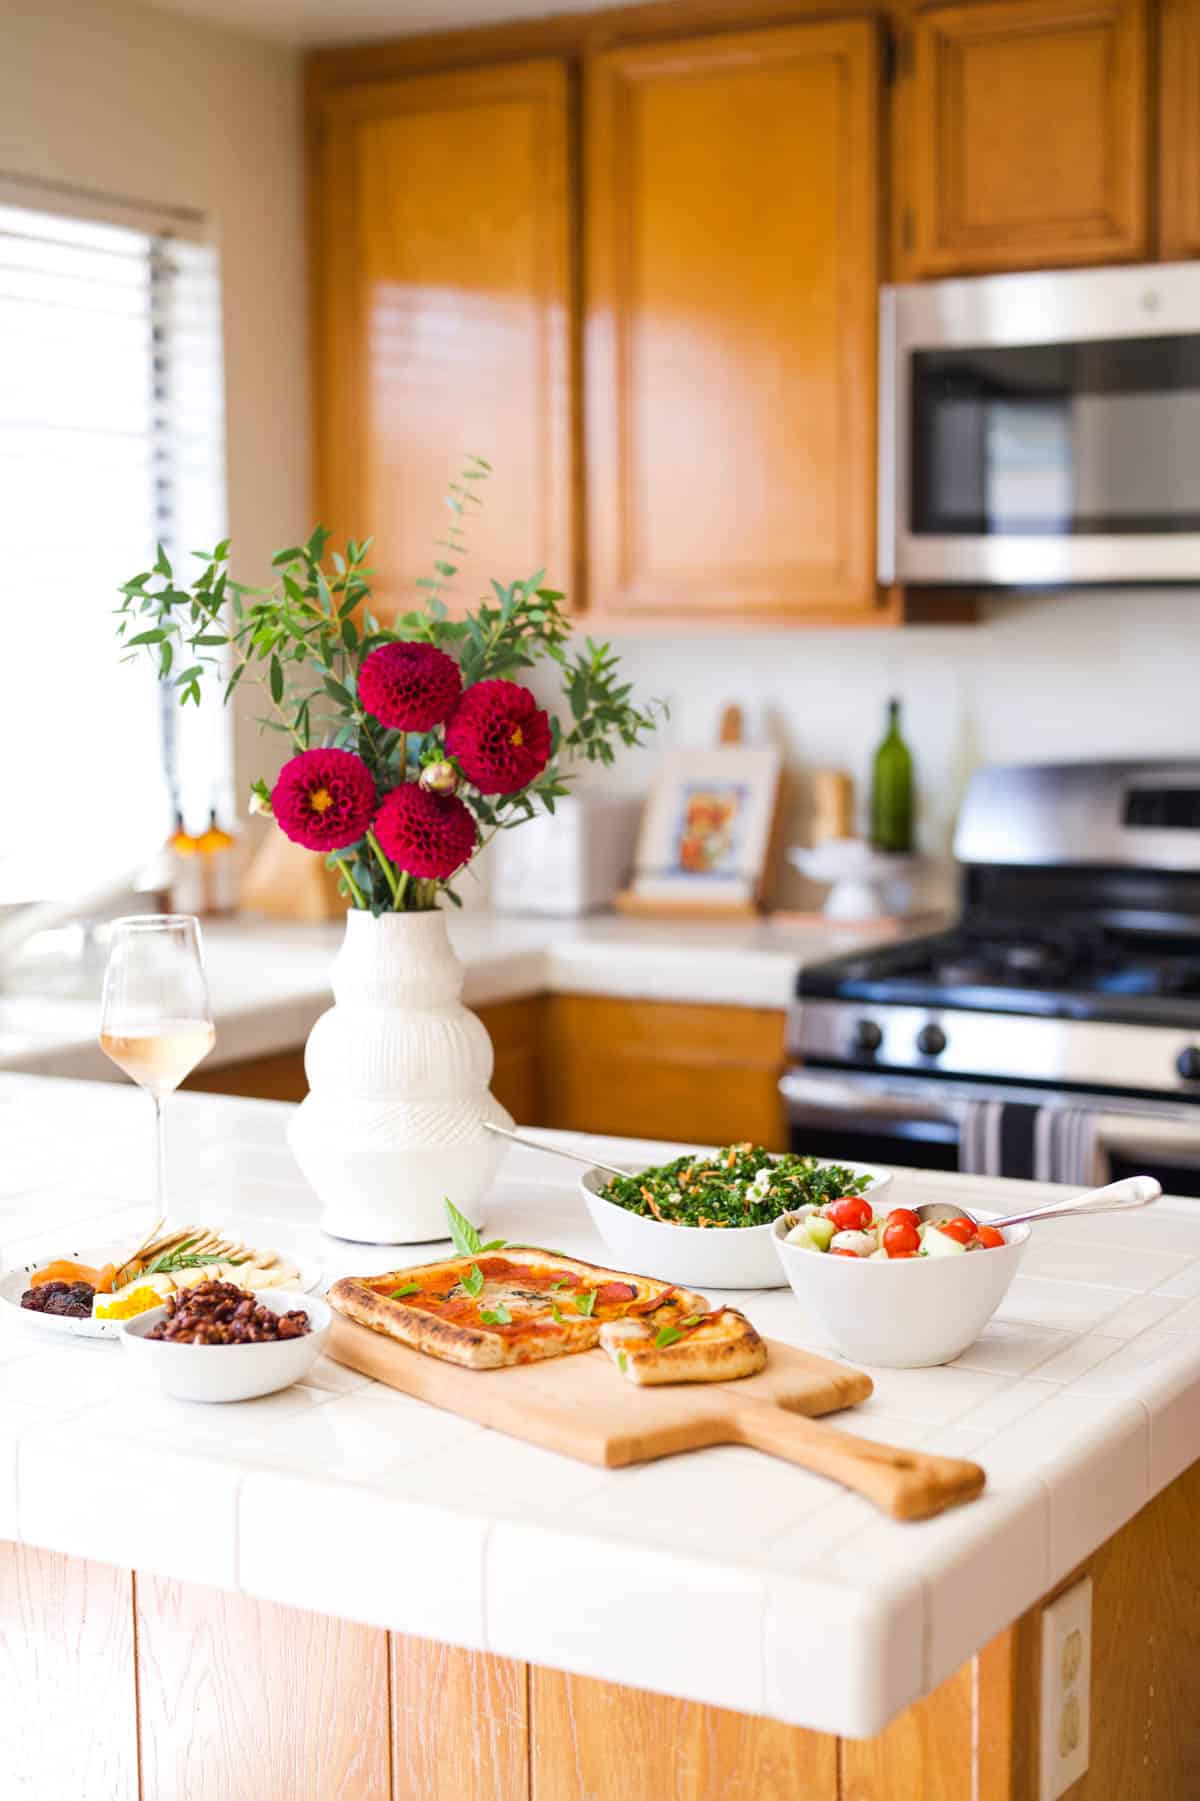 White serving dishes holding food on a kitchen counter with a vase of flowers and a wine glass.